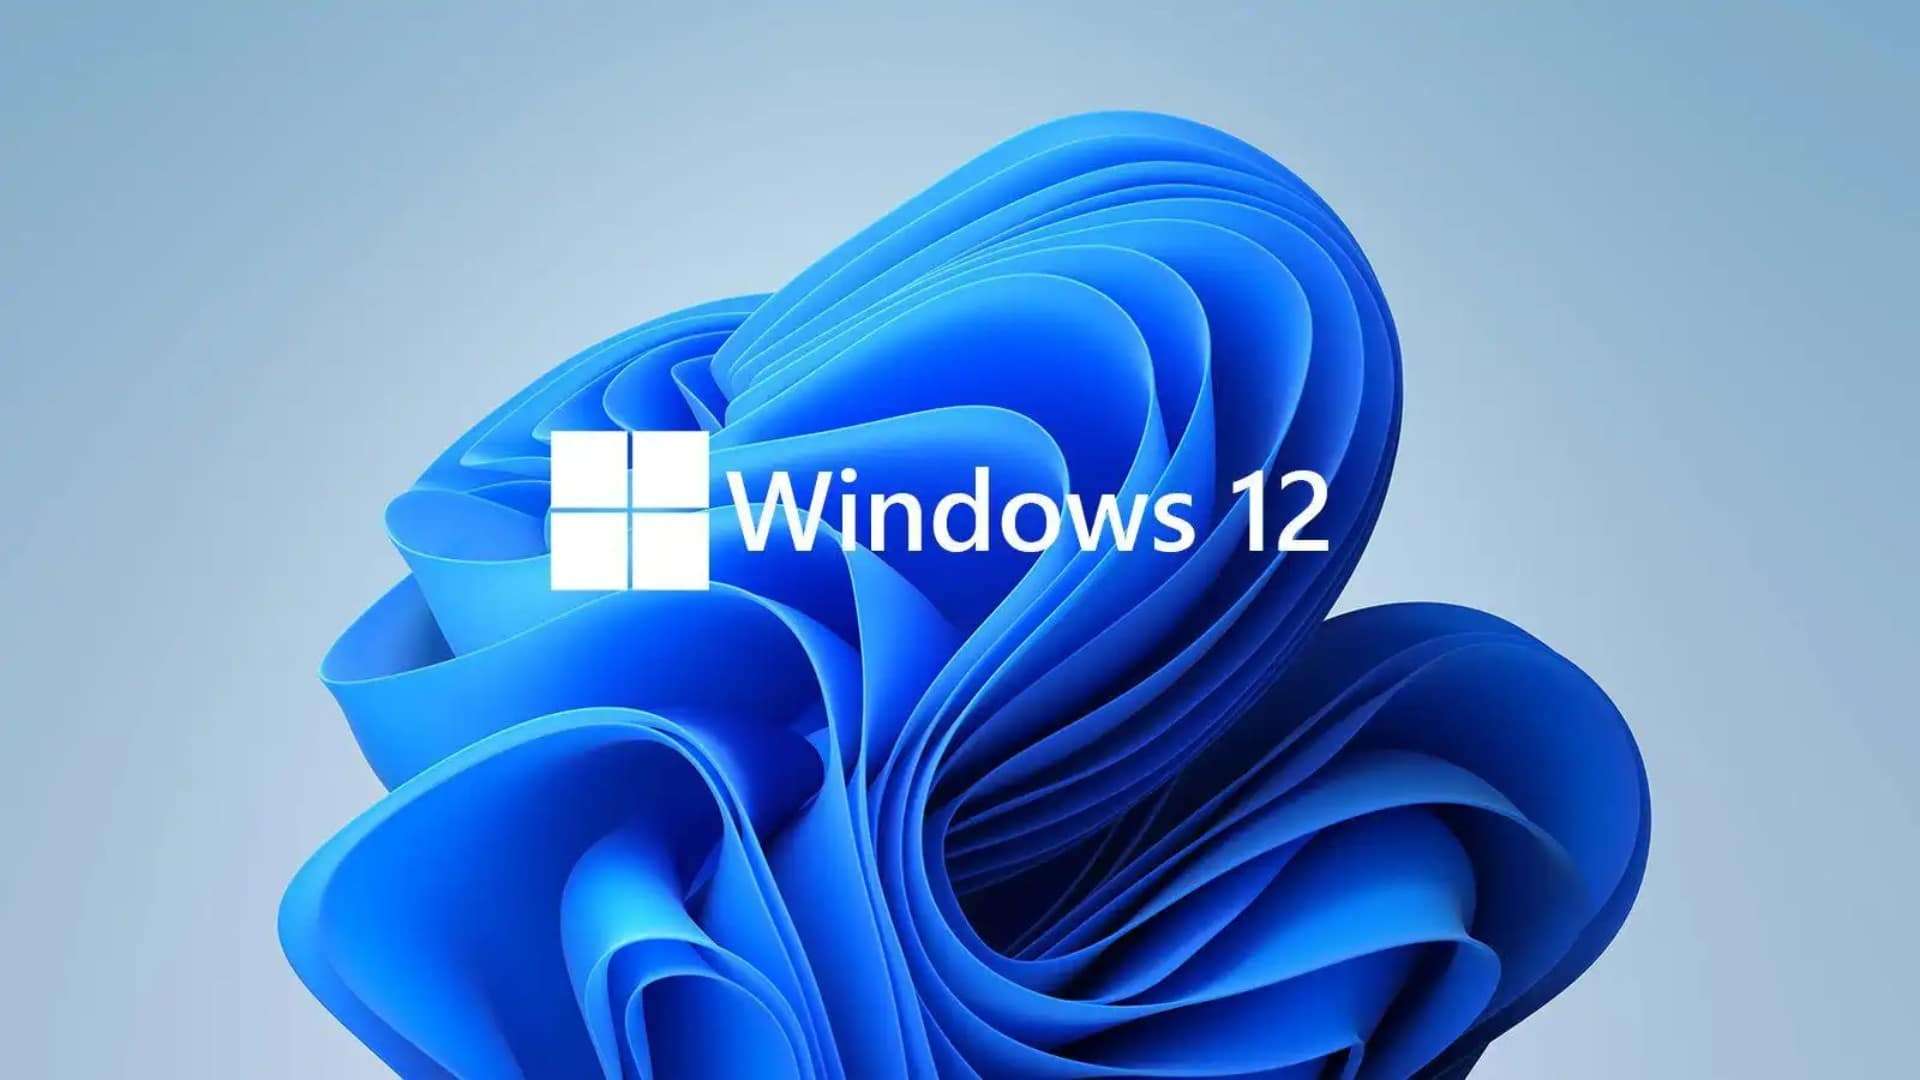 Windows 12 is coming: possible minimum requirements